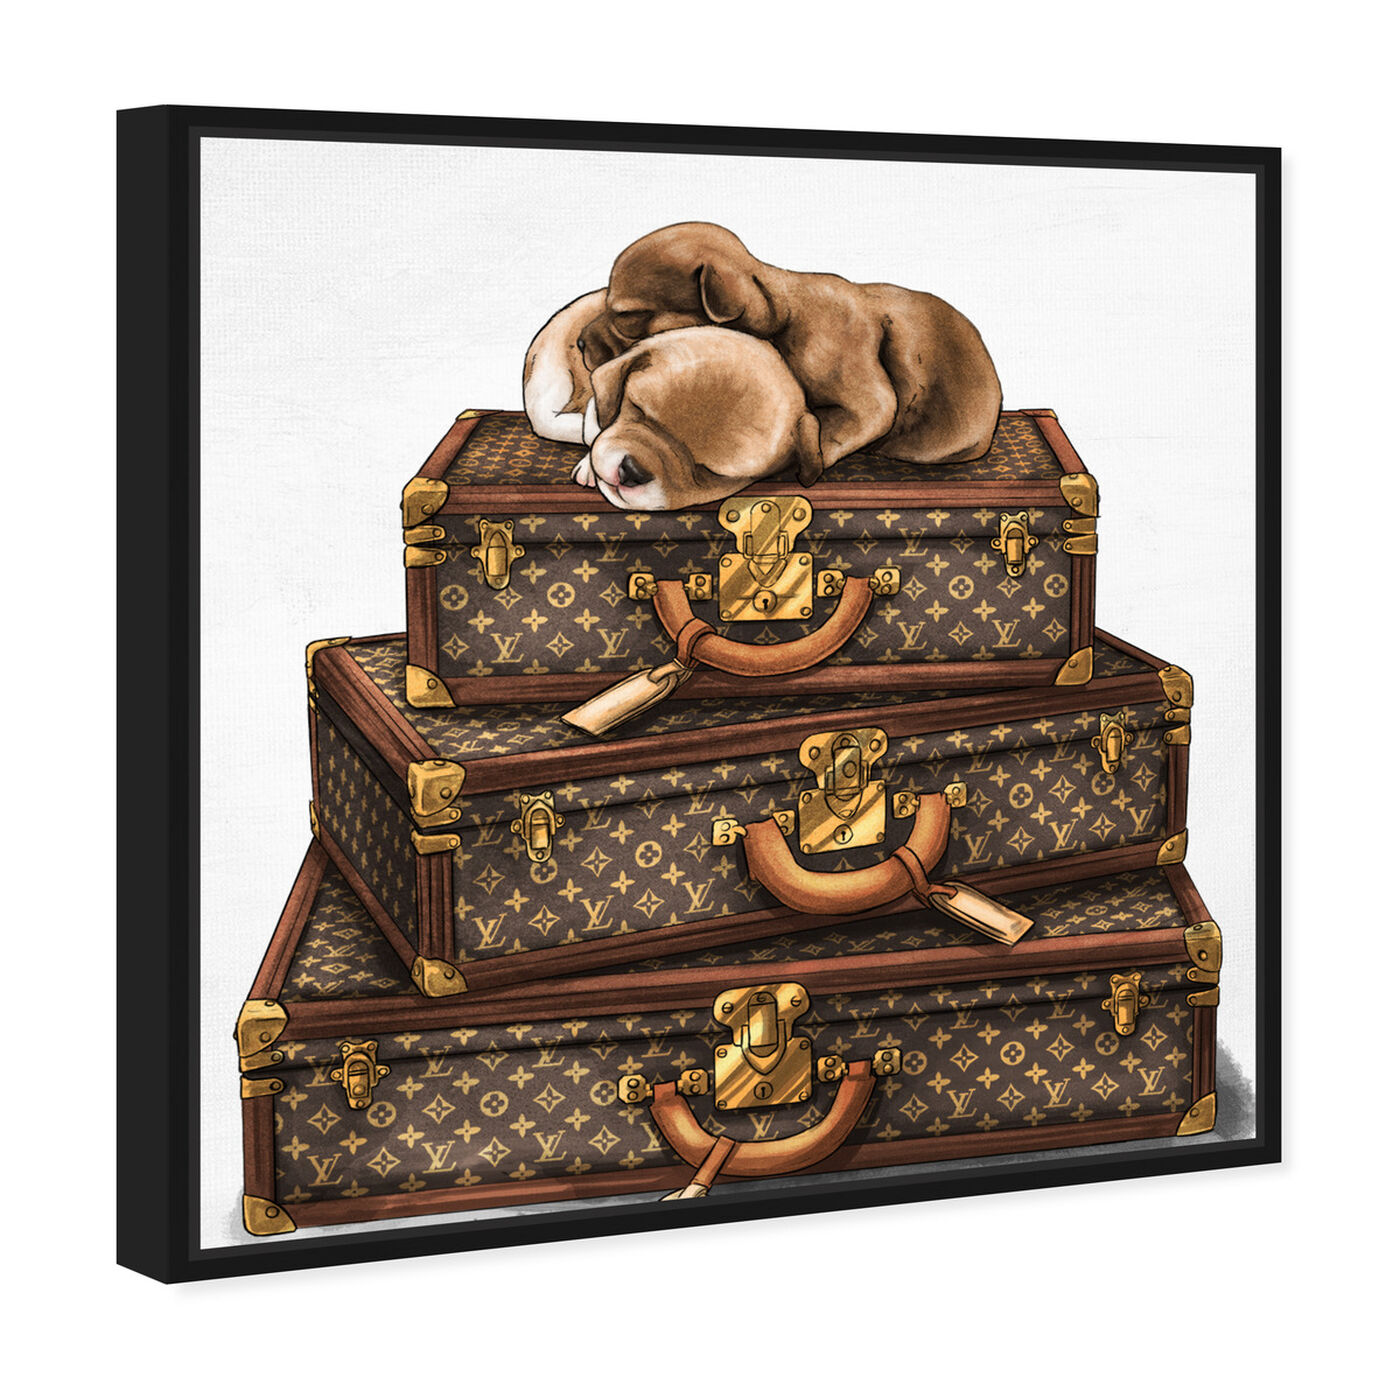 Angled view of Sleeping Pair Suitcase featuring fashion and glam and travel essentials art.